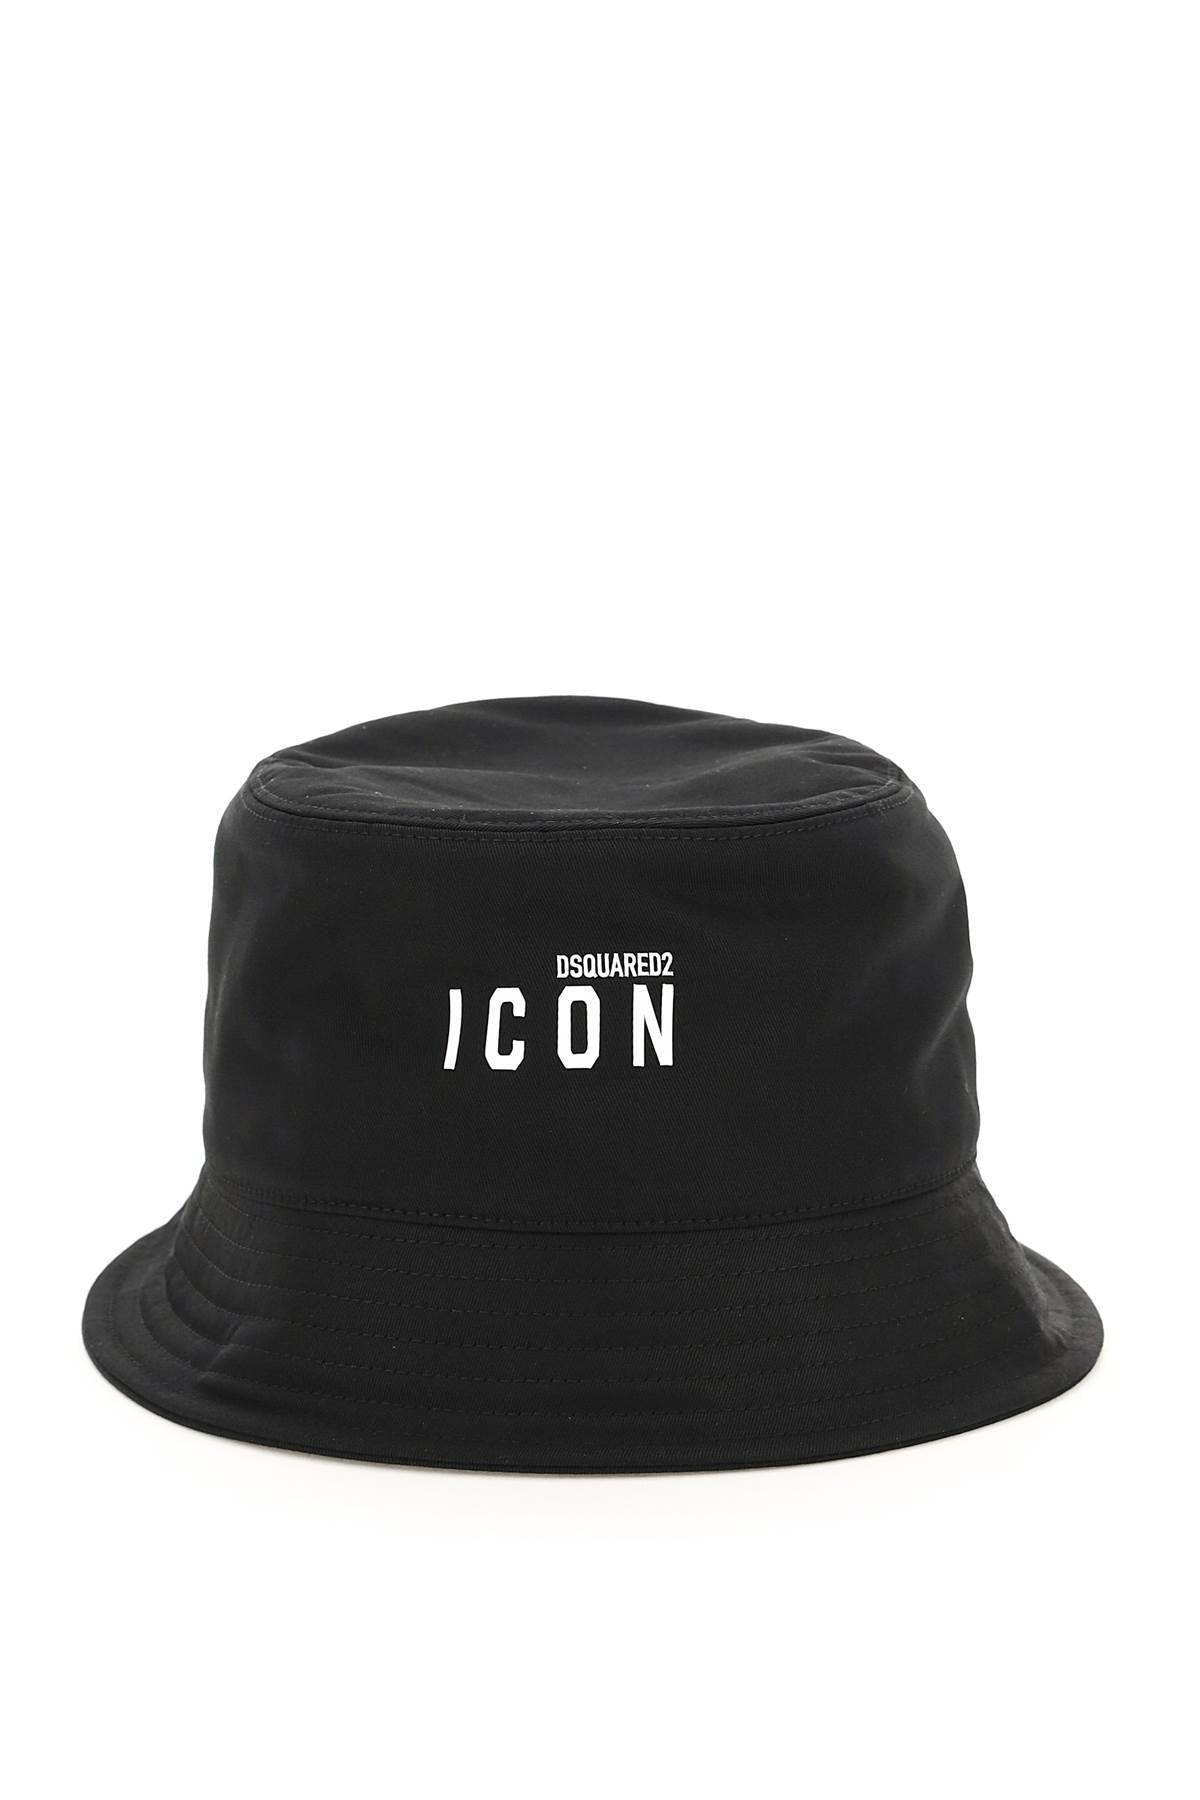 Dsquared2 'icon' bucket hat-0